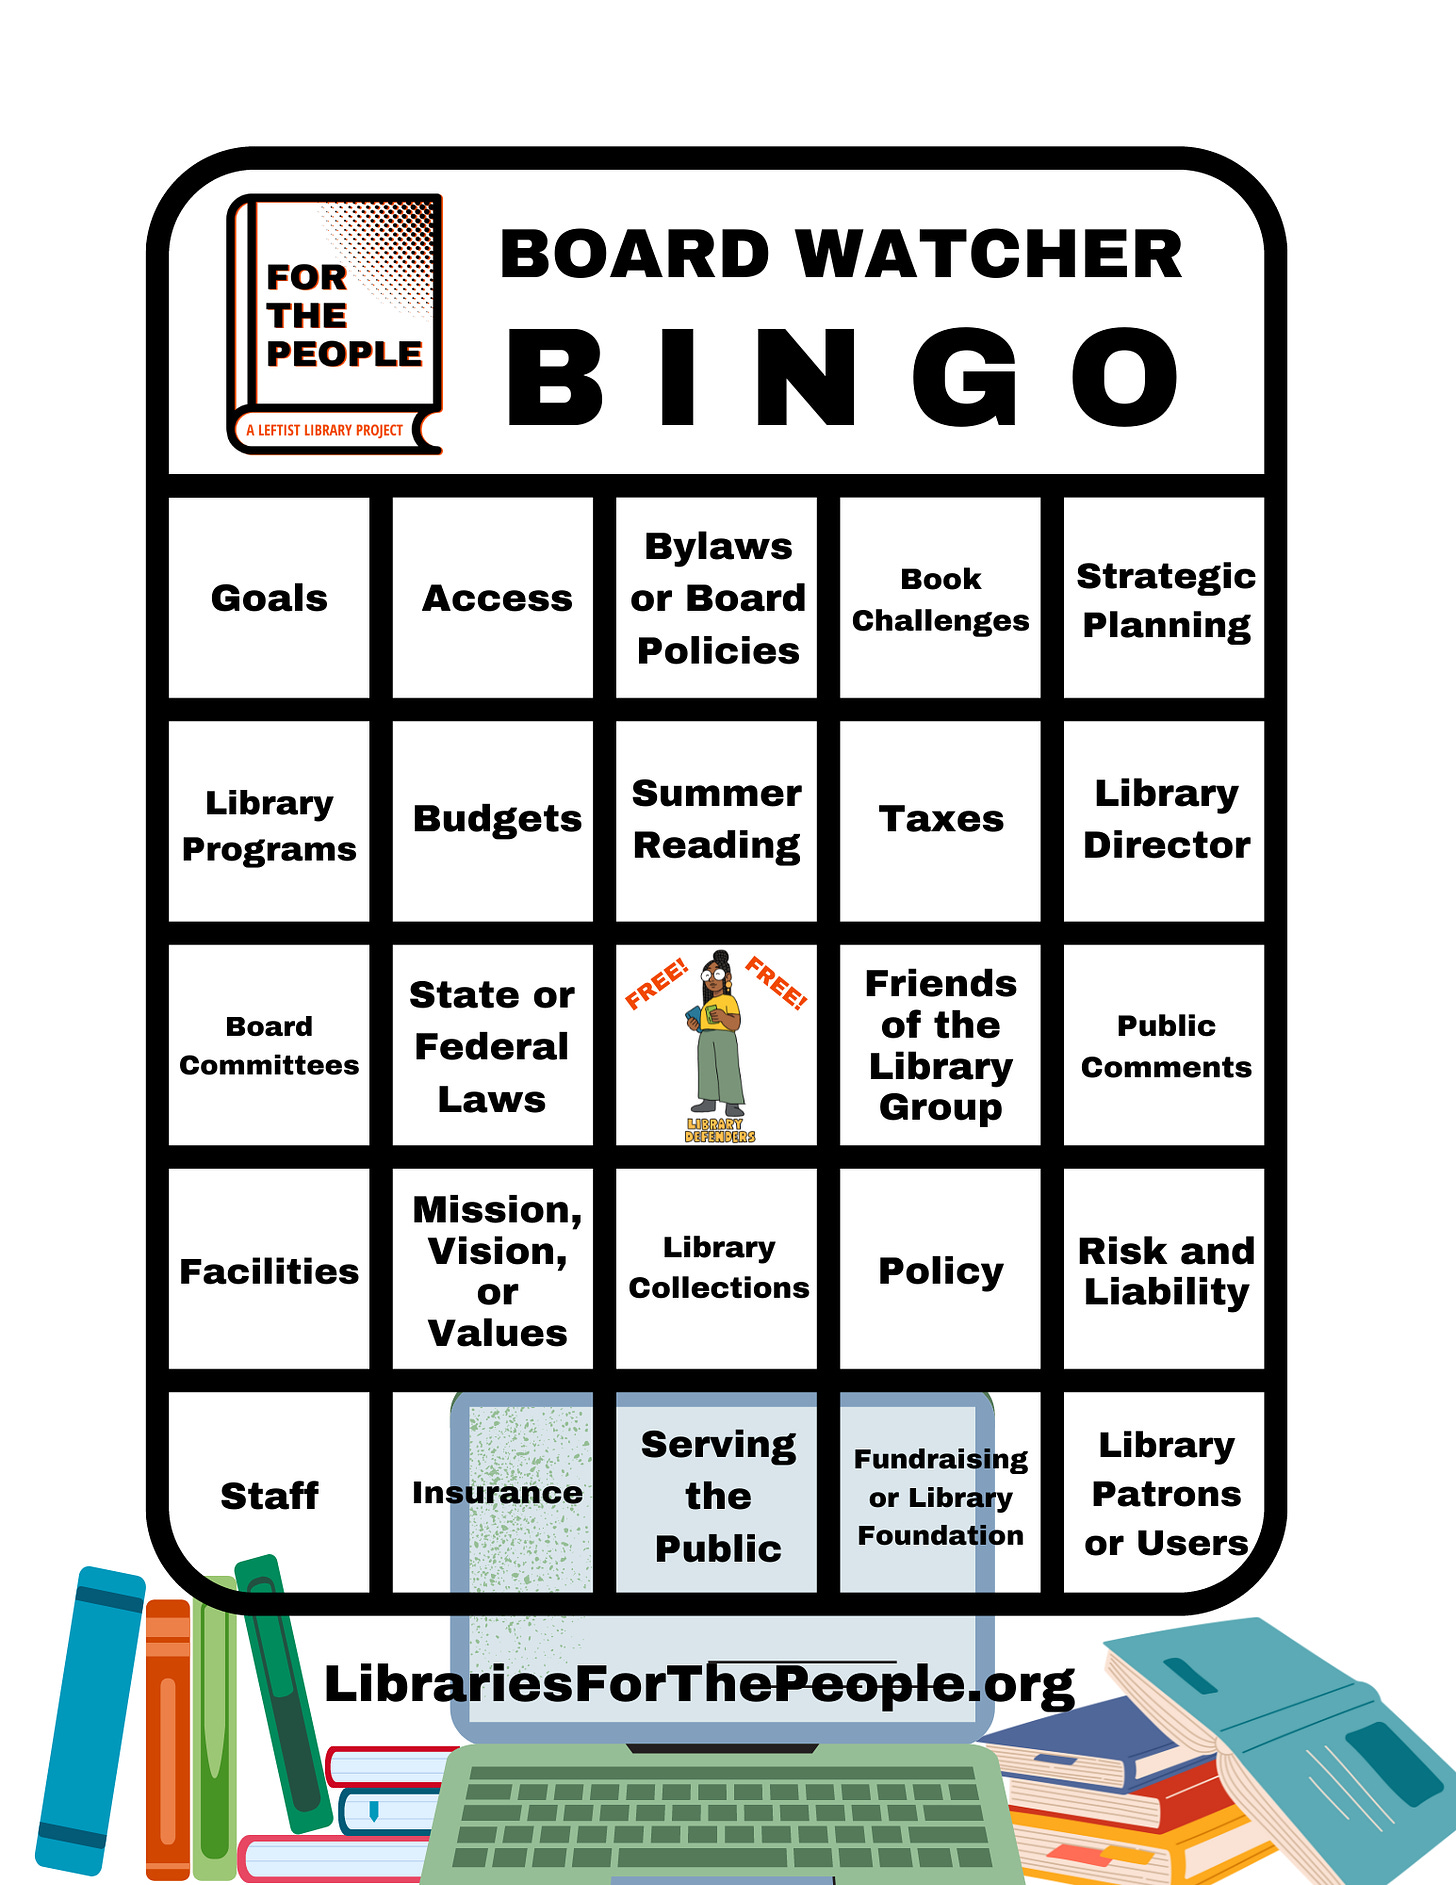 Bingo card with For the People logo in the top left. Titled "Board Watcher Bingo". Squares include values like "Bylaws or Board Policies", "Strategic Planning", "Book Challenges", "Library Programs", "State or Federal Laws" and more.